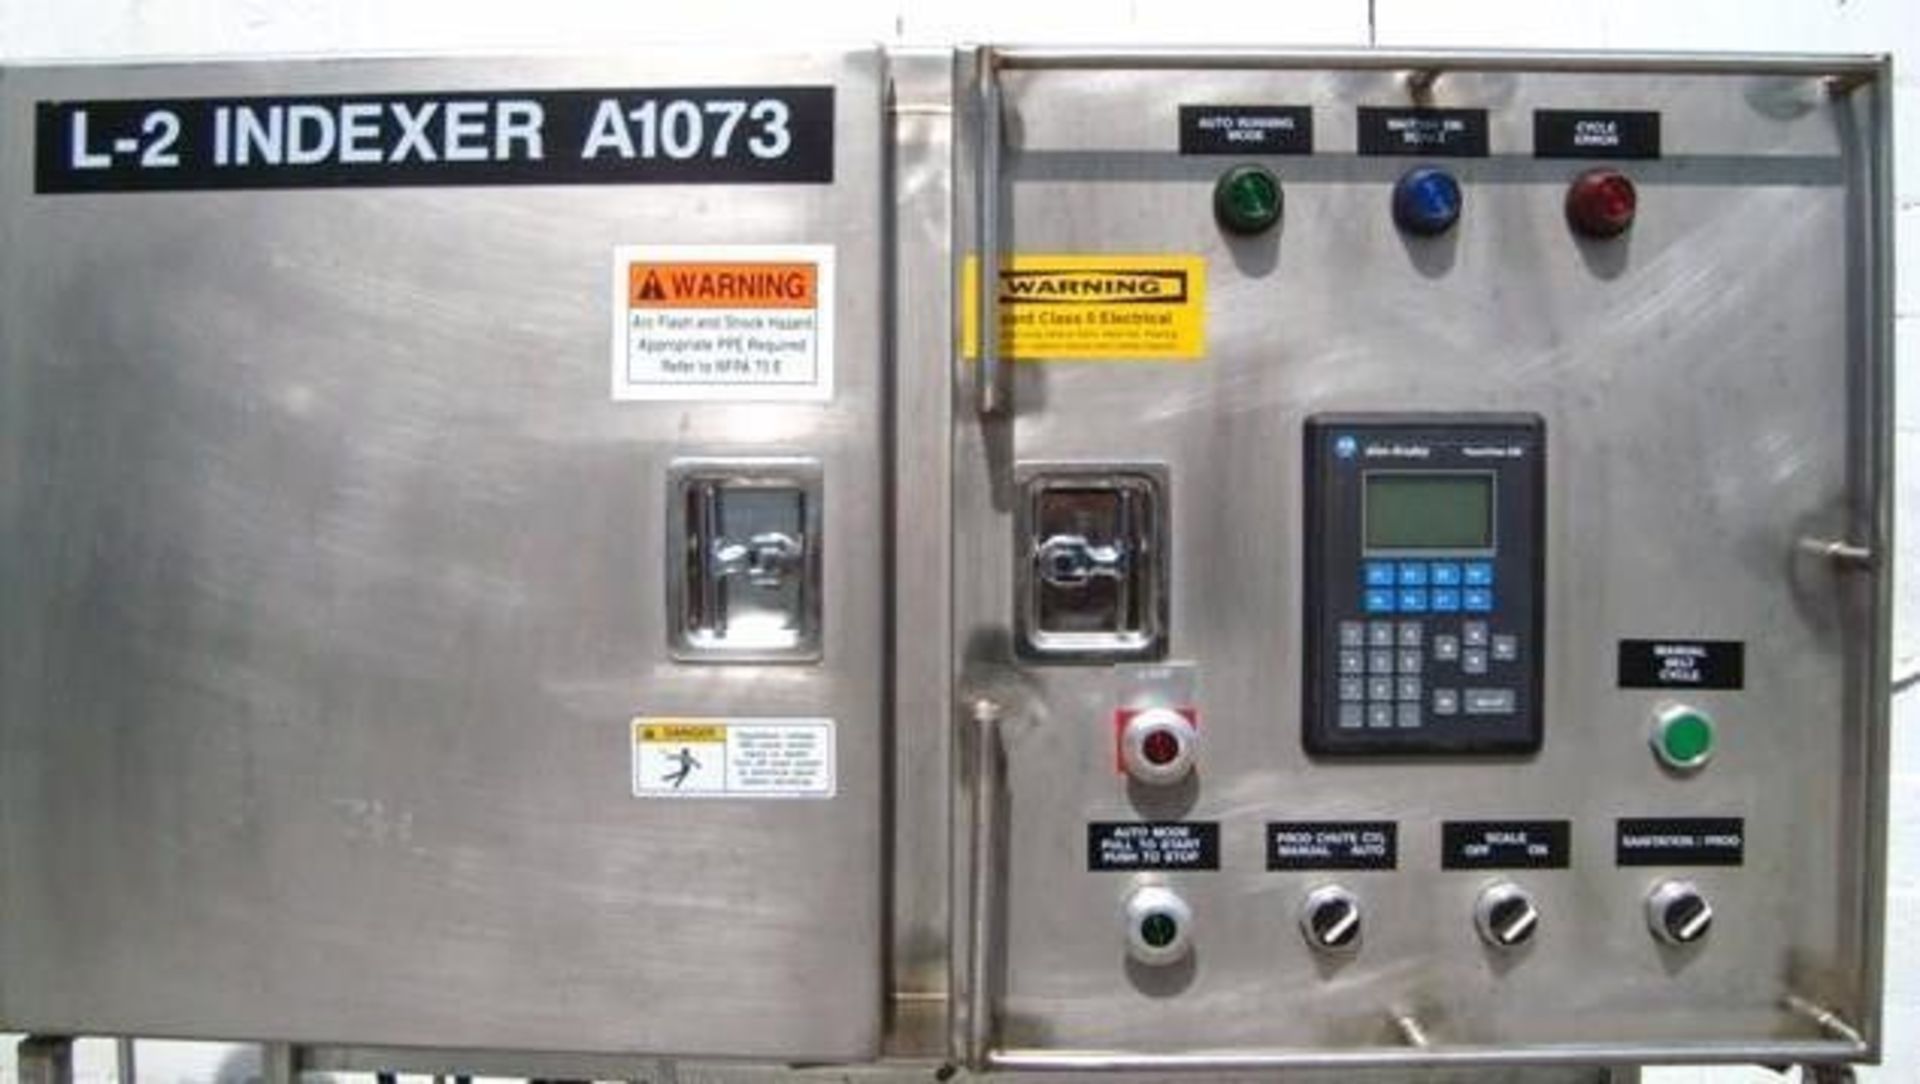 Food Process Systems S/S Sanitary Box Filler, Model 6000, S/N 145702 with Allen Bradley Ultra 3000 - Image 4 of 12